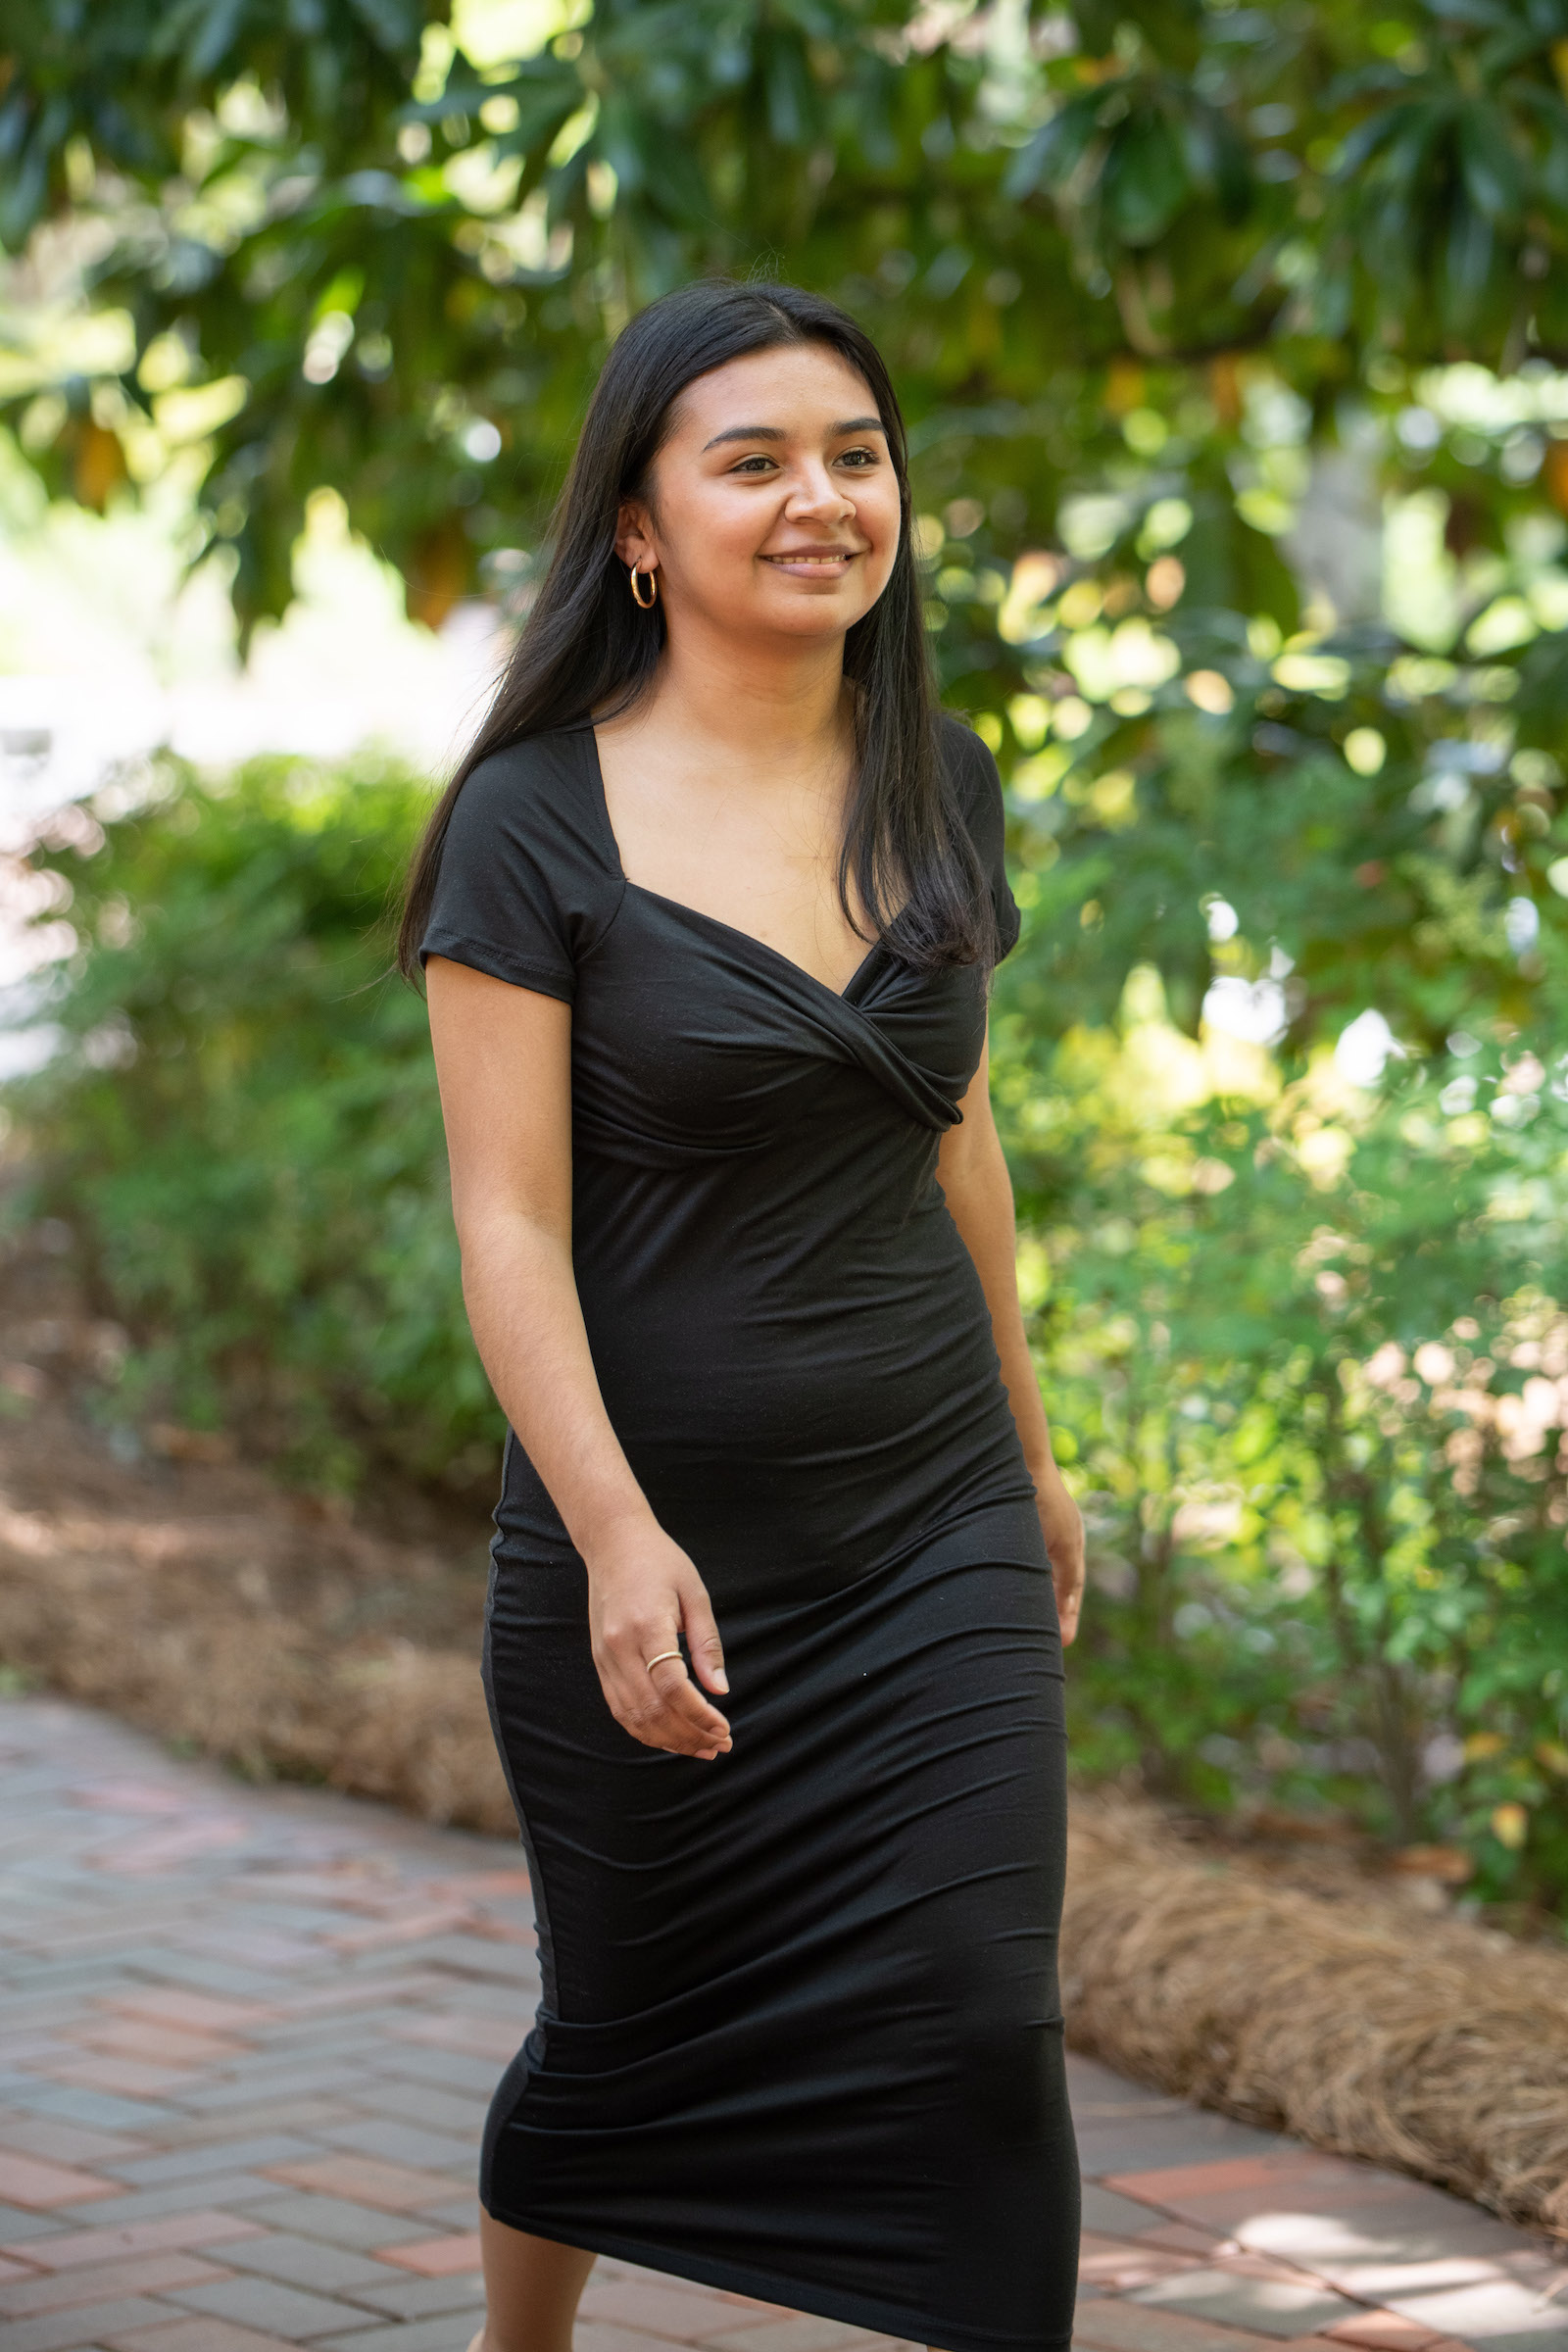 Frida Carrera's internship experience is in marketing, and she plans to work in that field. (Photo by Rob Felt)